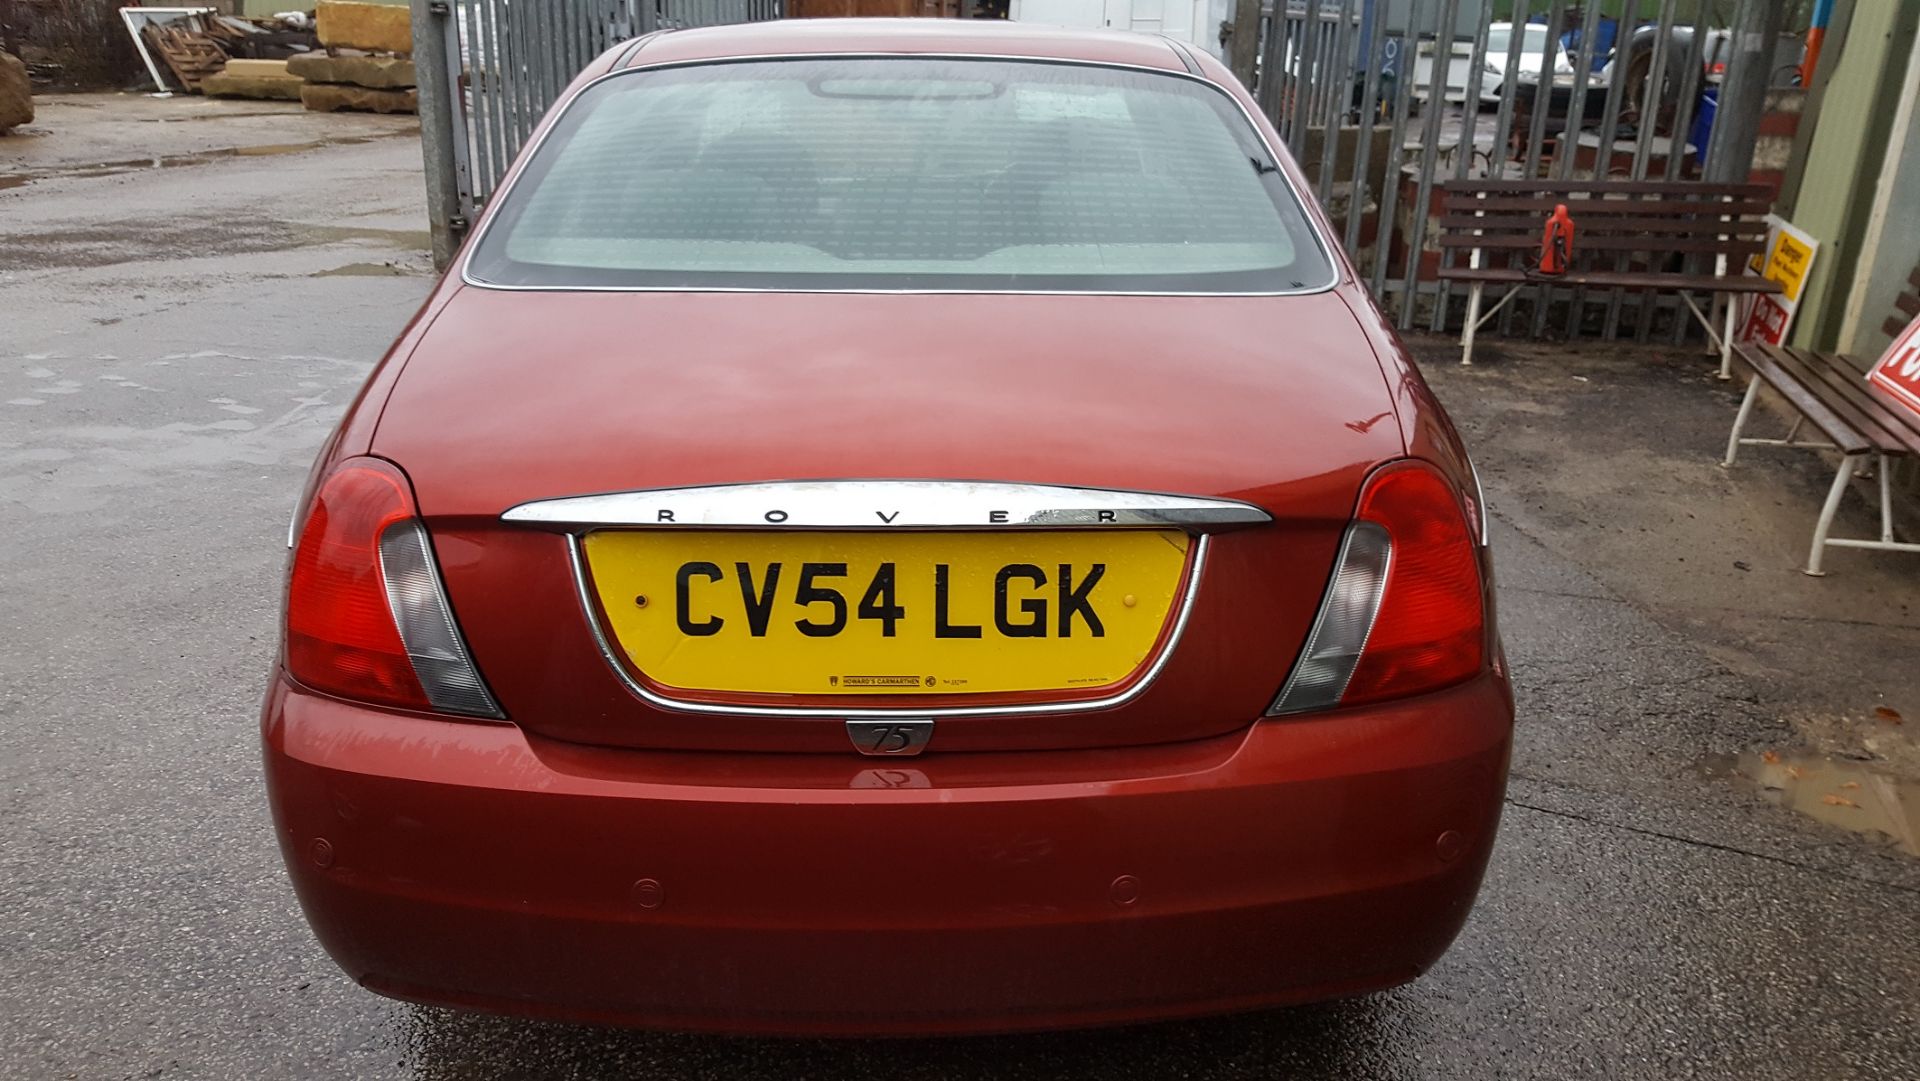 LOW MILES! 2004/54 REG ROVER 75 CLASSIC RED PETROL 4 DOOR SALOON, SHOWING 1 FORMER KEEPER *NO VAT* - Image 4 of 8